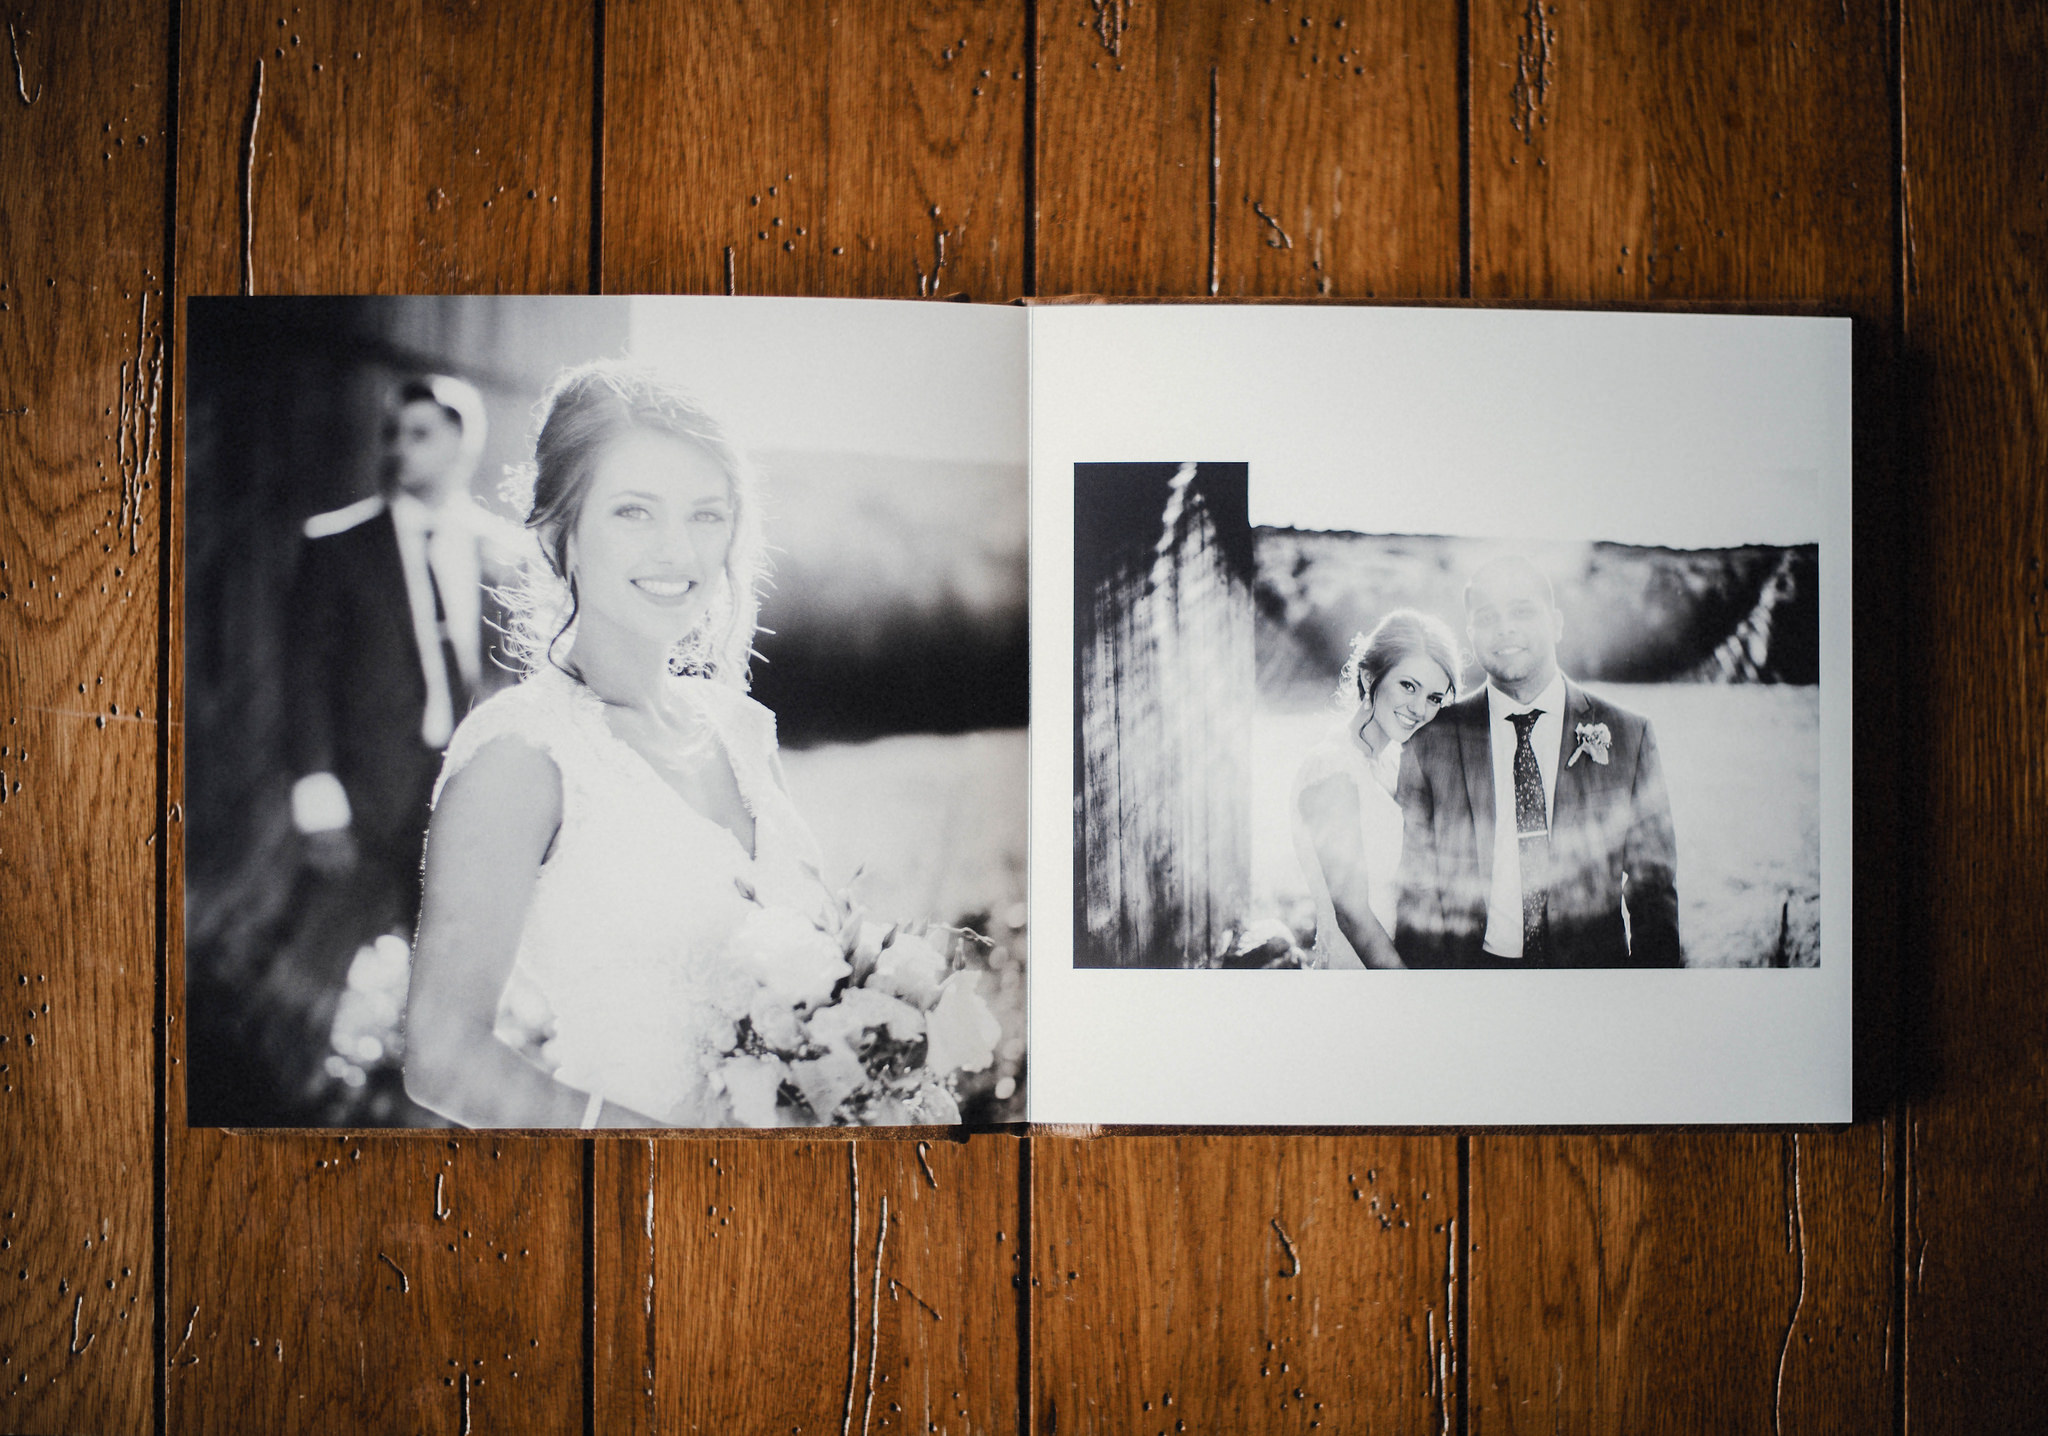 Make a Professional Wedding Album in Minutes With Fundy’s New Album Designer 7.0